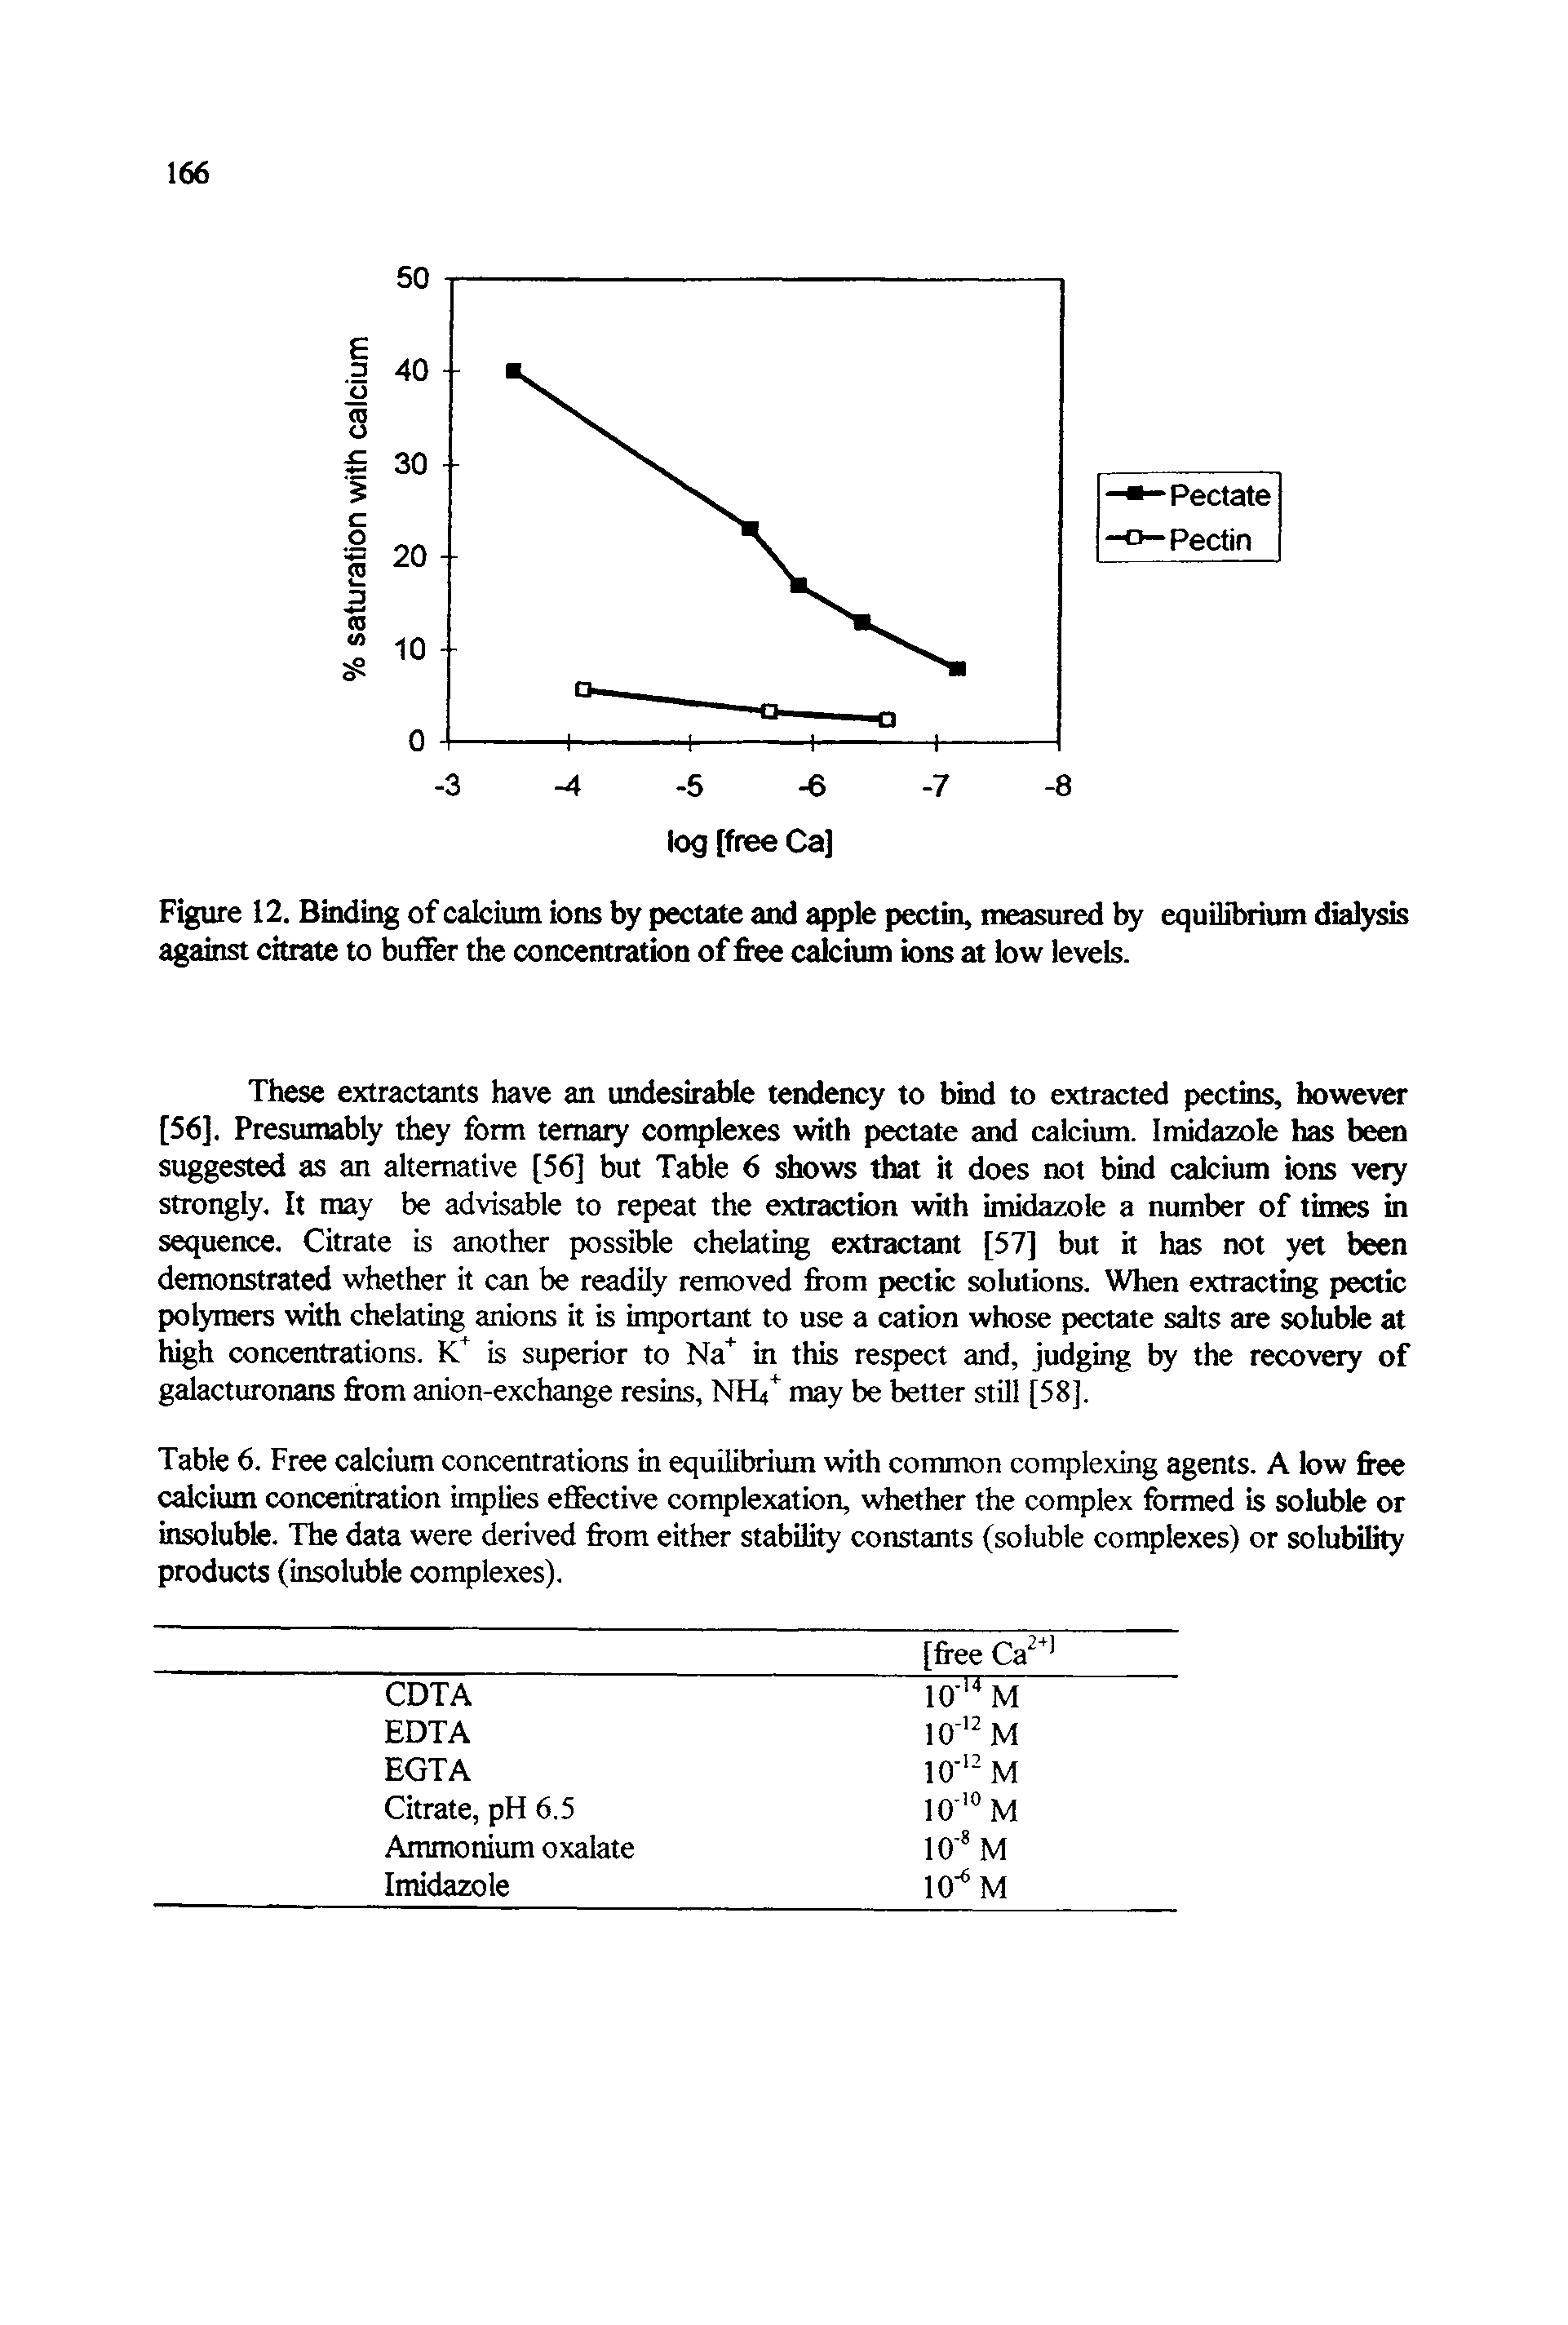 Figure 12. Binding of calcium ions by pectate and apple pectin, measured by equilibrium dialysis gainst citrate to buffer the concentration of free calcium ions at low levels.